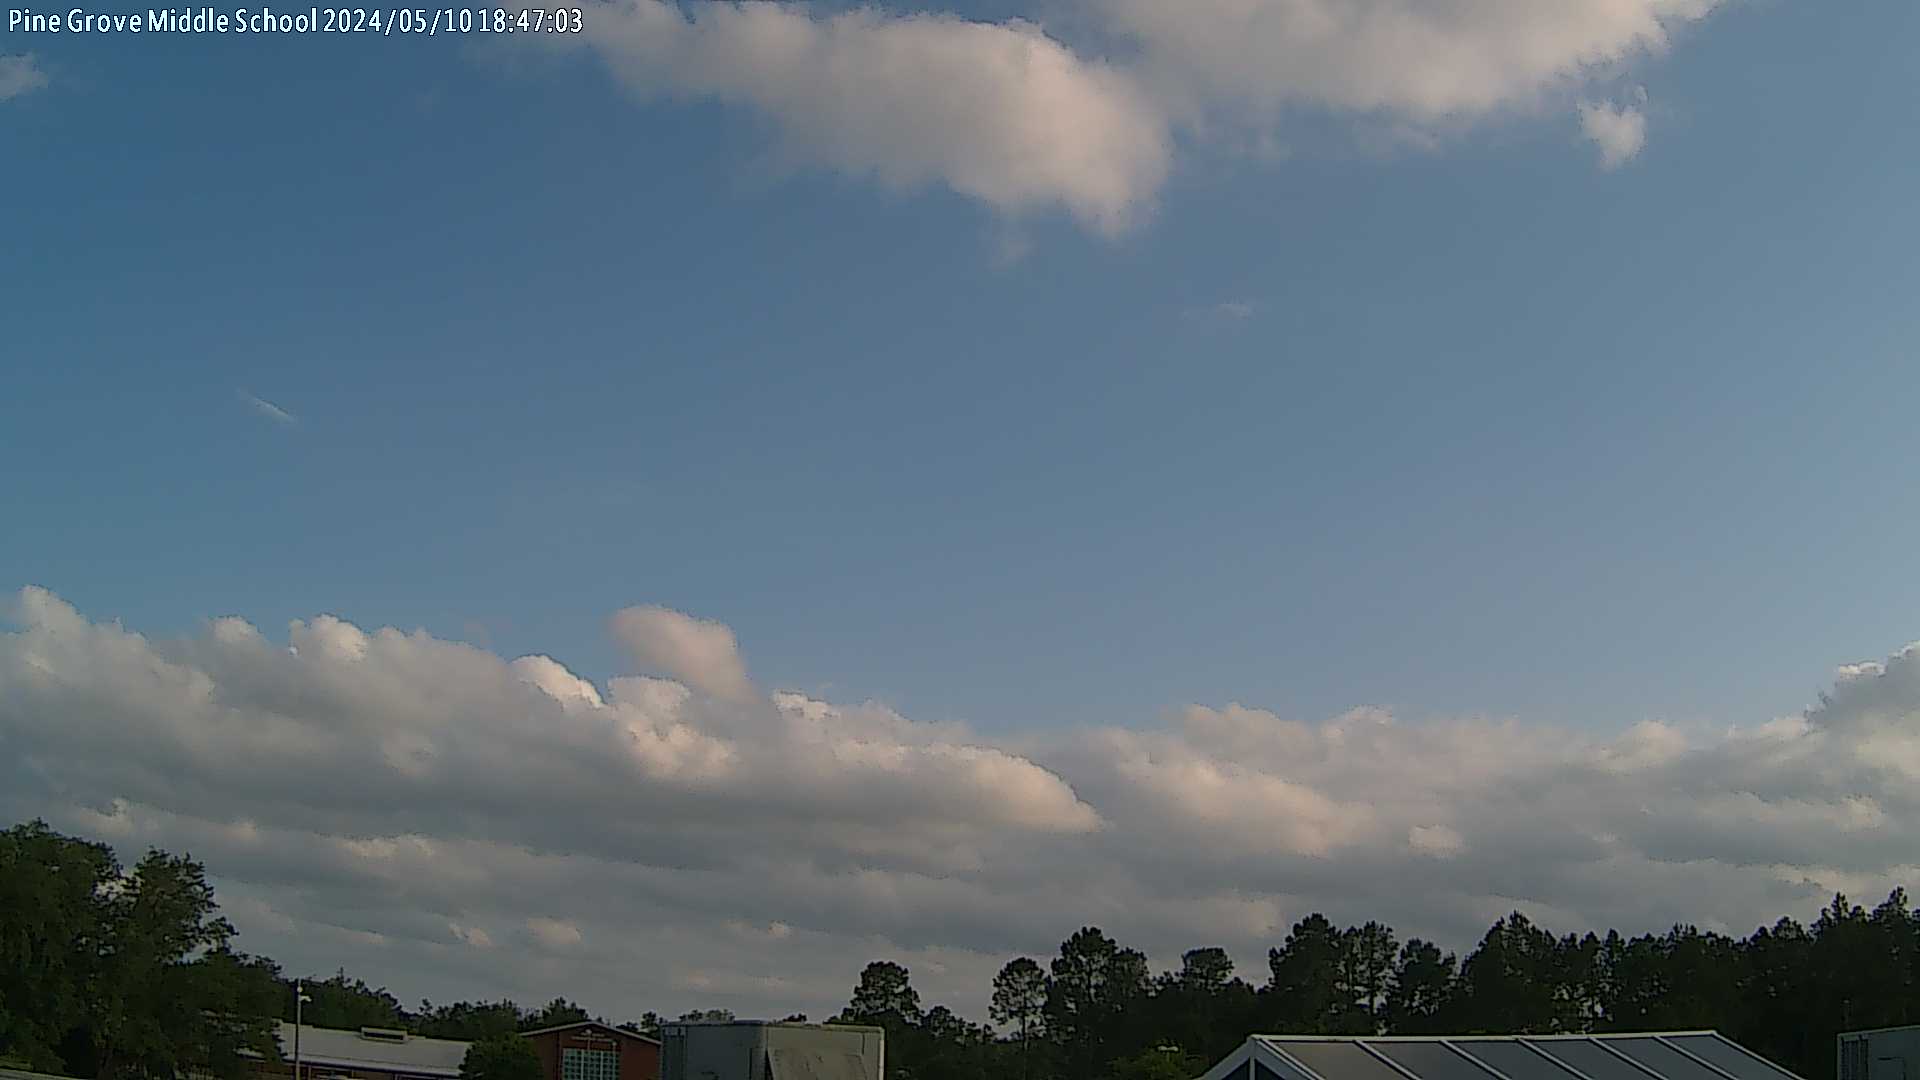  WeatherSTEM Cloud Camera PineGroveWxSTEM in Lowndes County, Georgia GA at Pine Grove Middle School